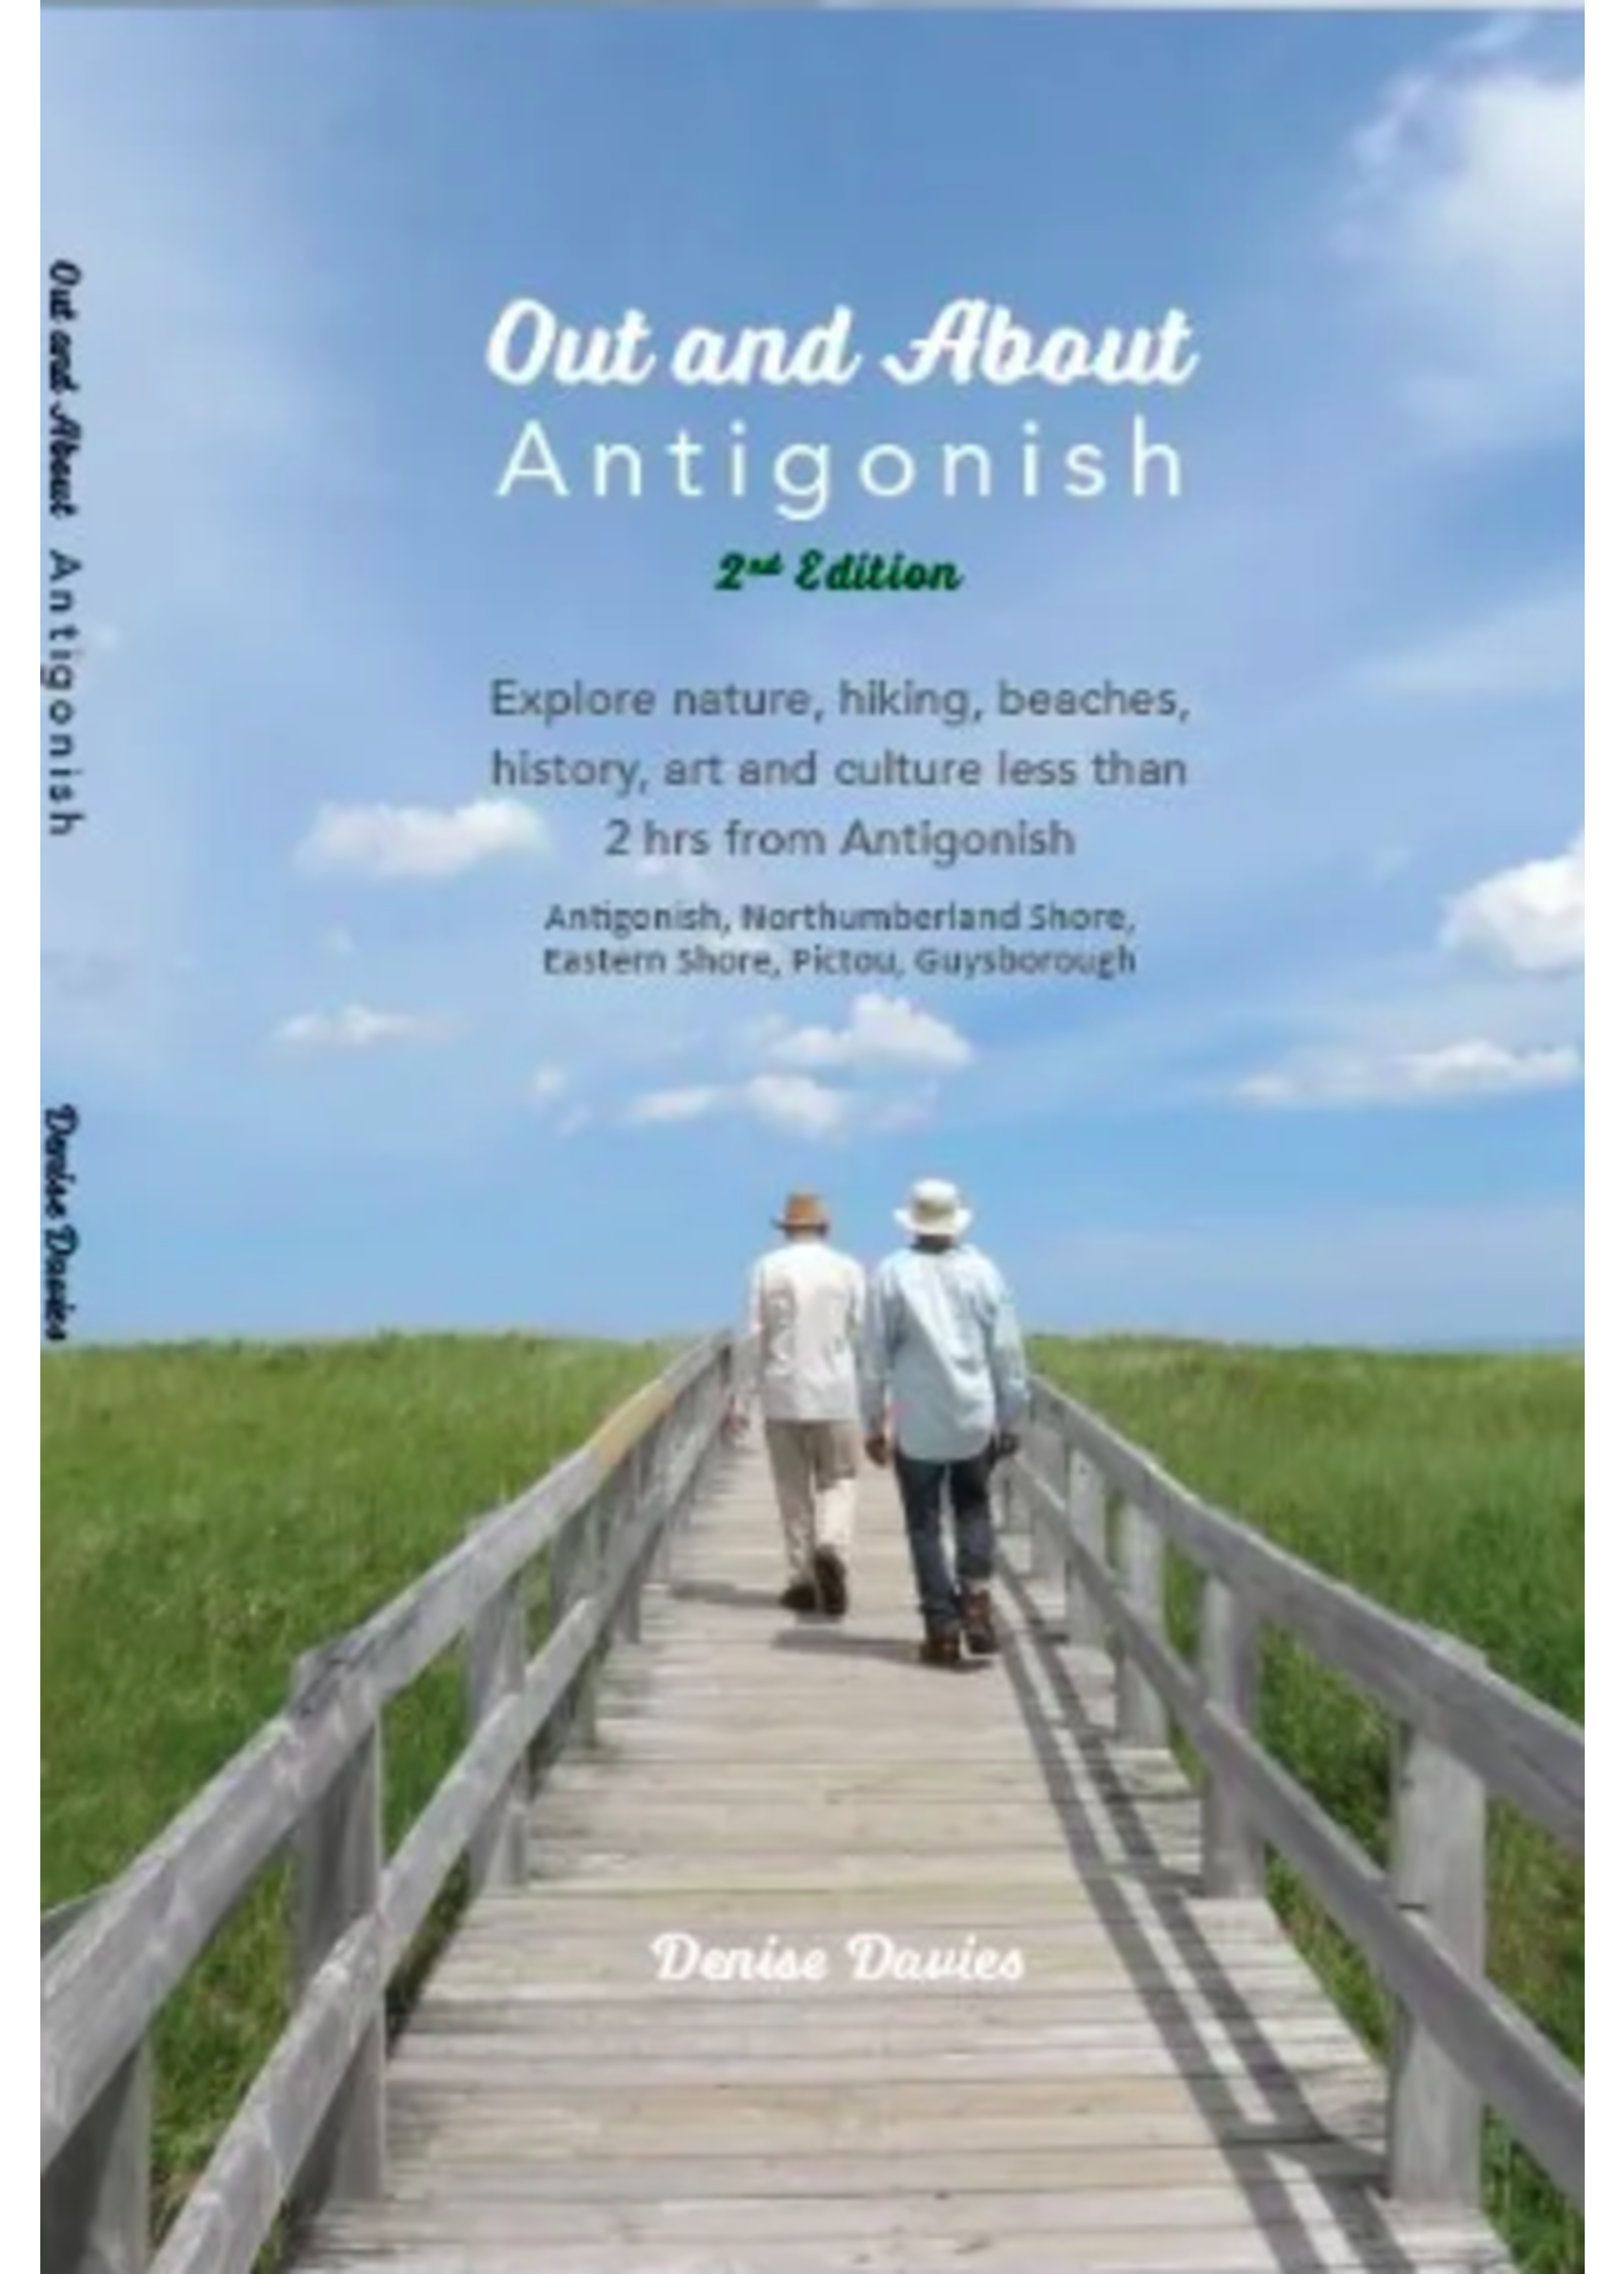 Out and About Antigonish, 2nd Ed. by Denise Davies